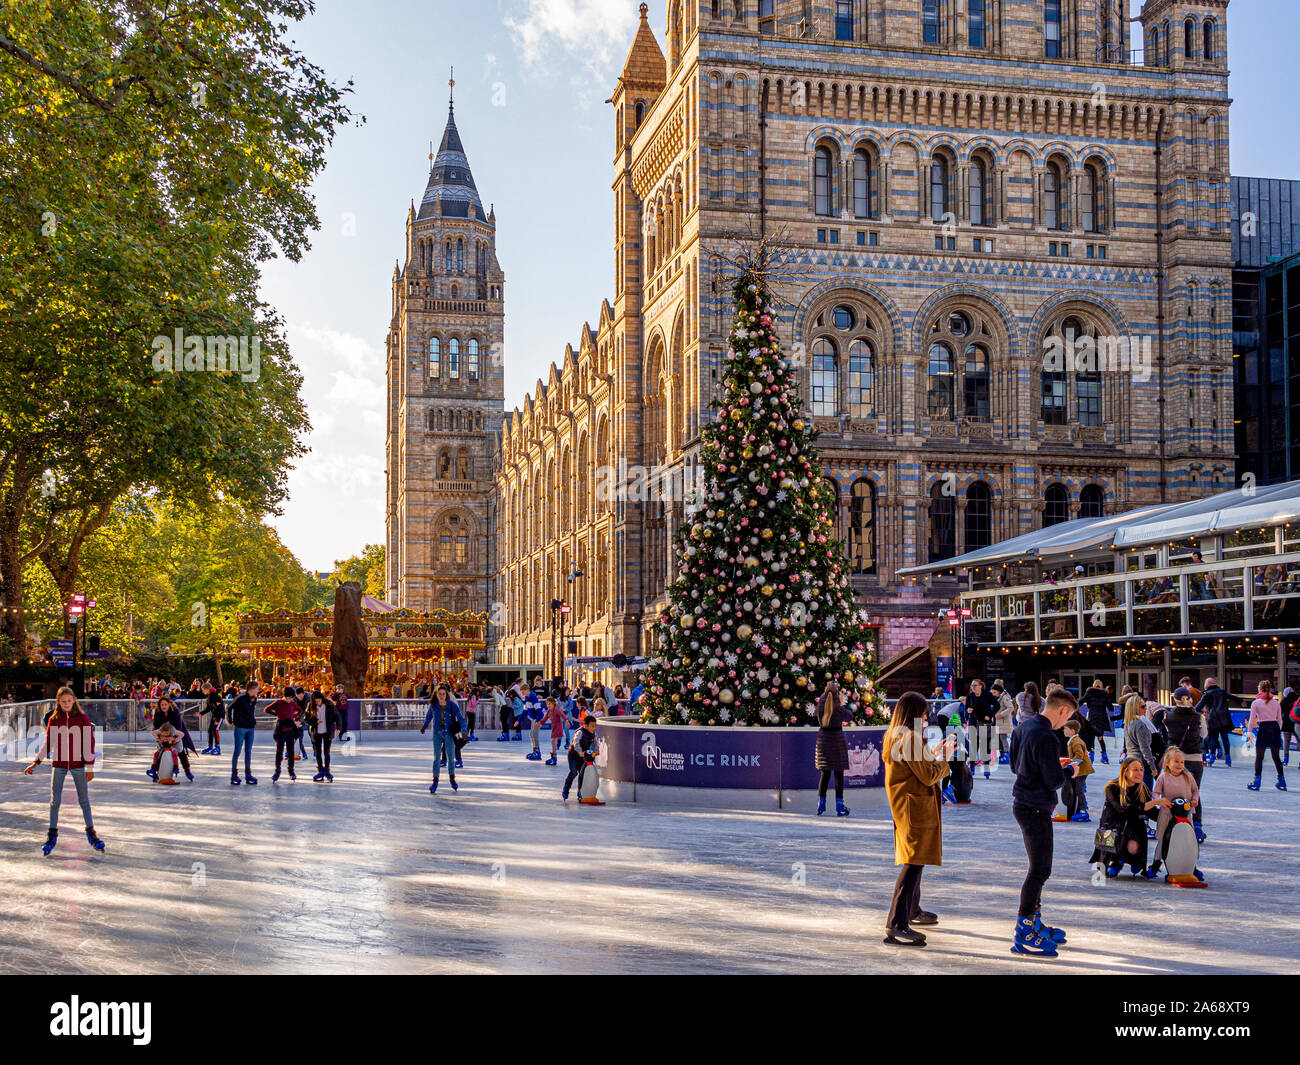 Outdoor ice rink at the Natural History Museum, London, UK. Stock Photo